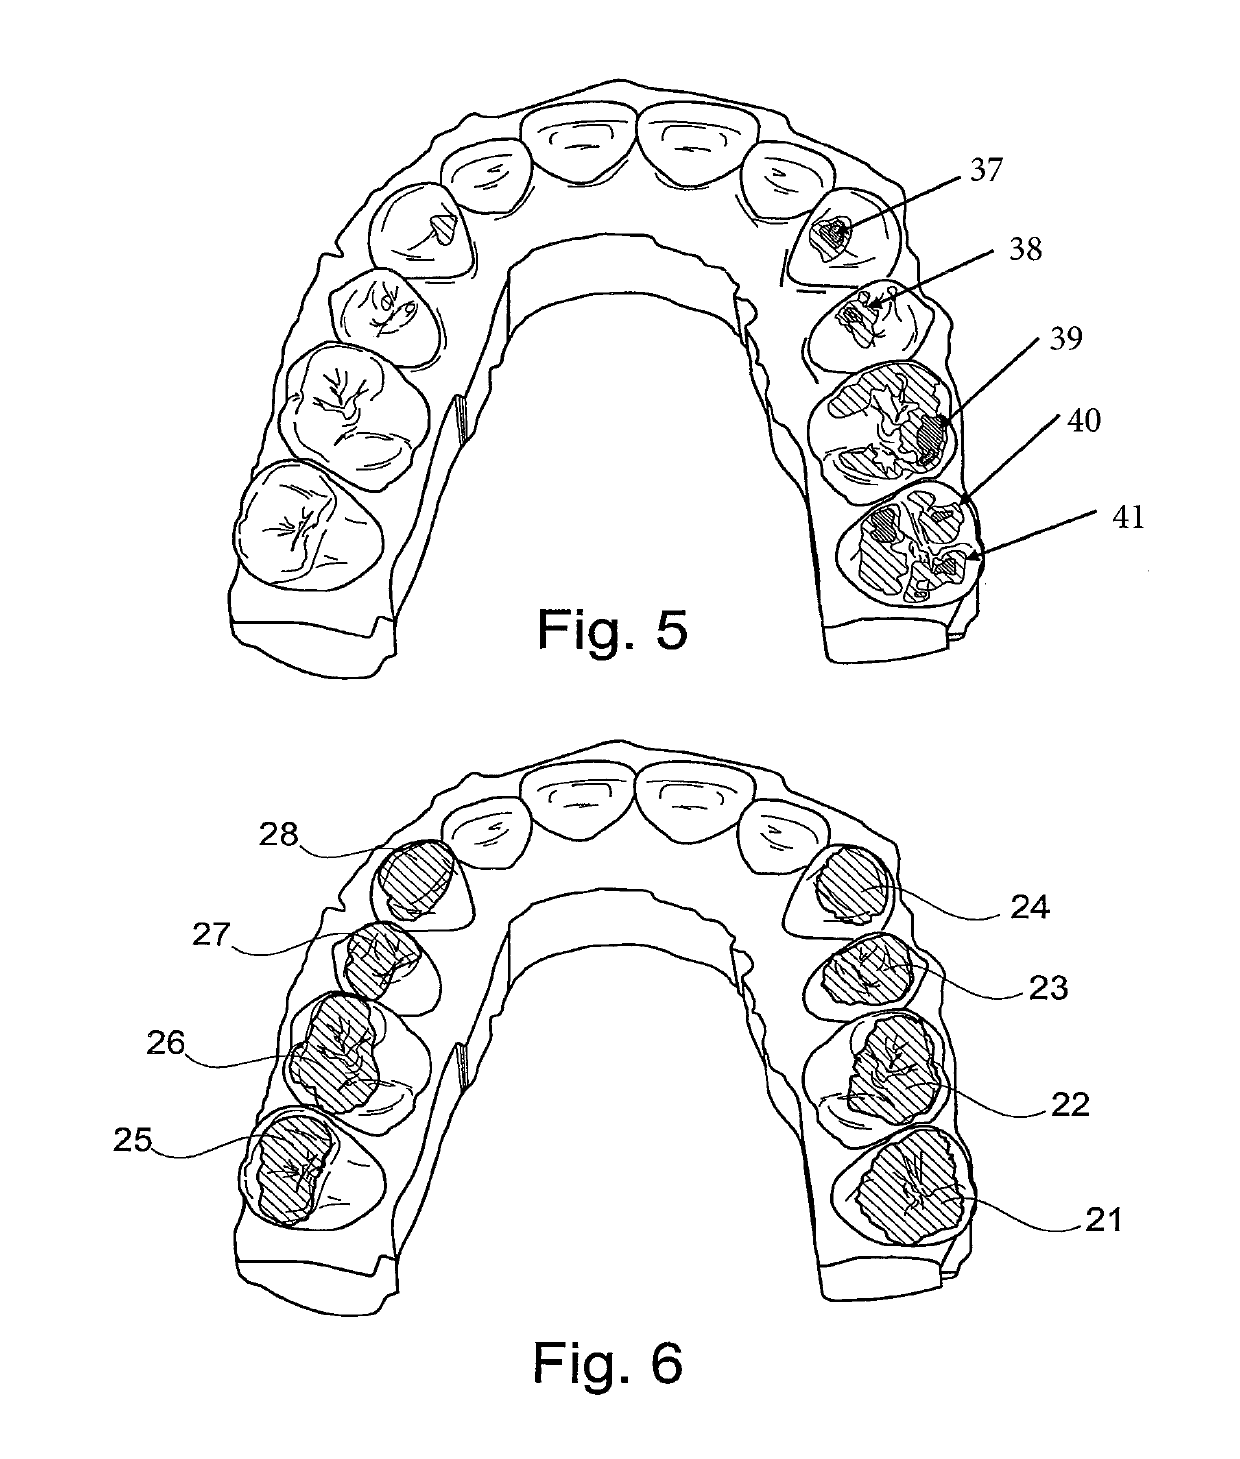 Method for constructing tooth surfaces of a dental prosthesis and for producing dental restorations